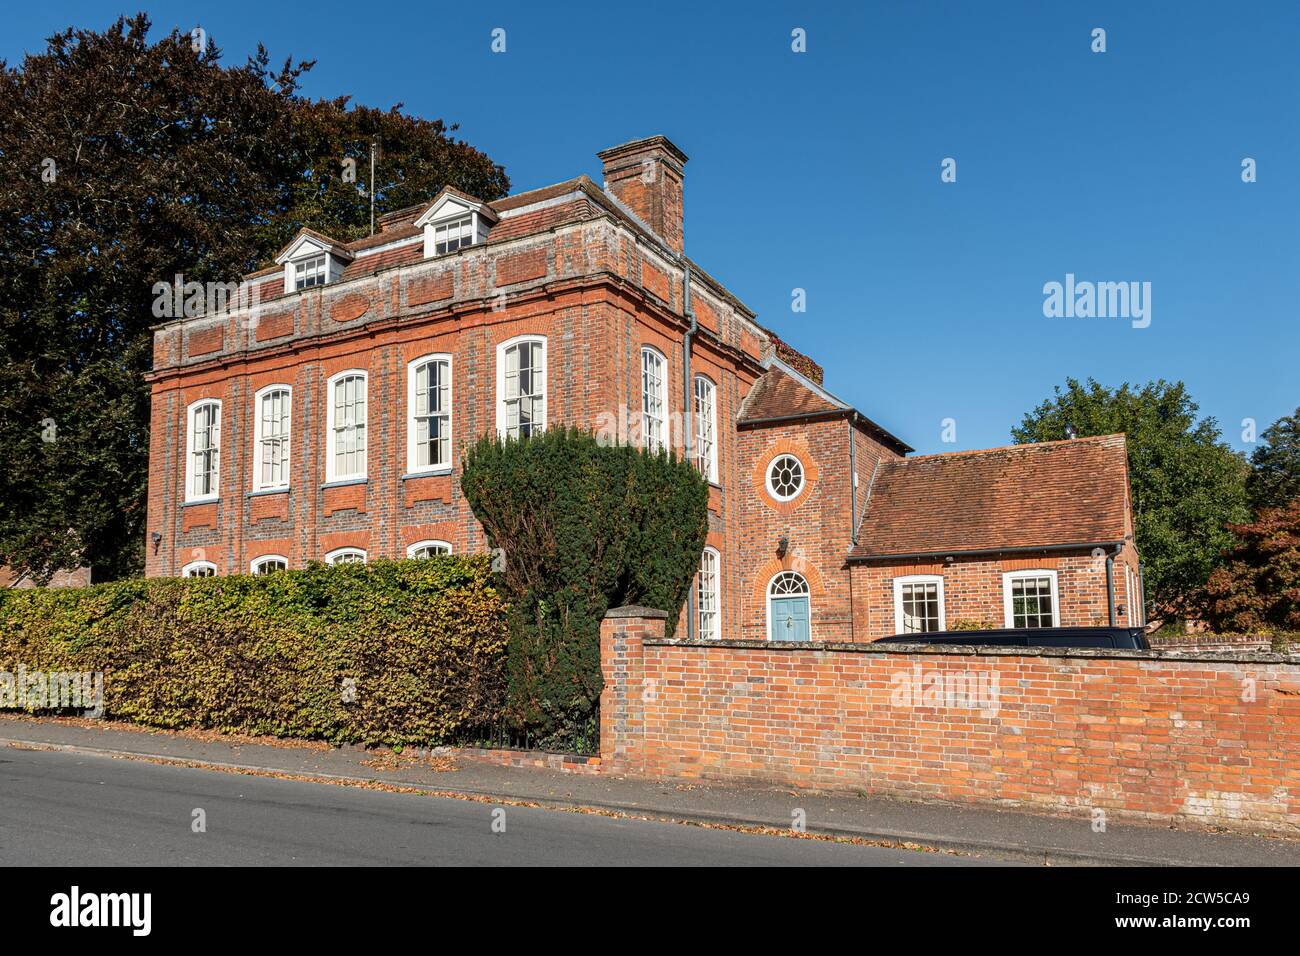 Ilsley Hall, also called Kennet House, a grade II* building dating from about 1700 in East Ilsley, a Berkshire village, UK Stock Photo